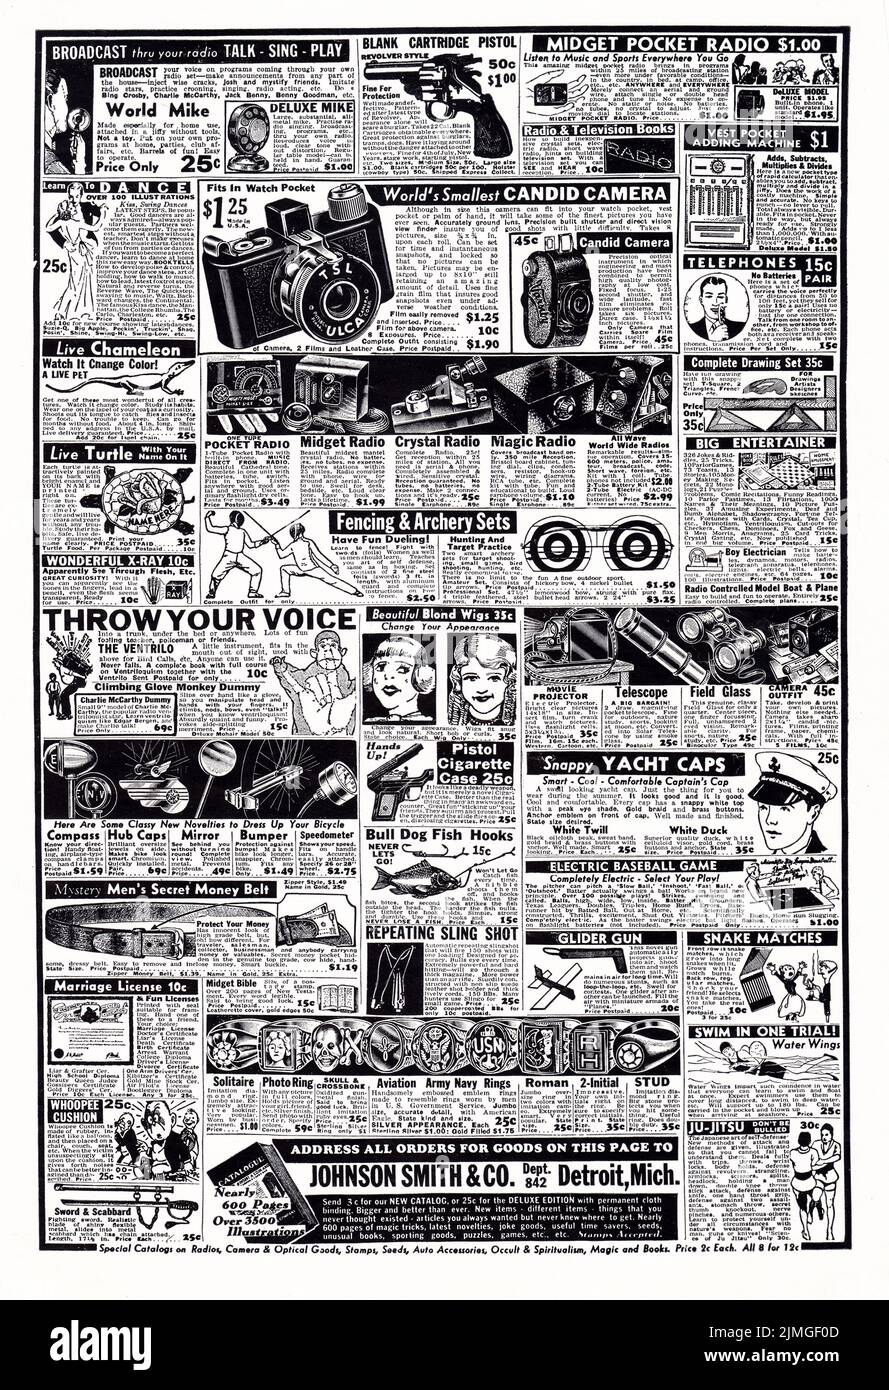 TCHOTCHKES. A full page ad from a 1938 music magazine advertising about 60 different gadgets, tchotchkes and must haves. Stock Photo